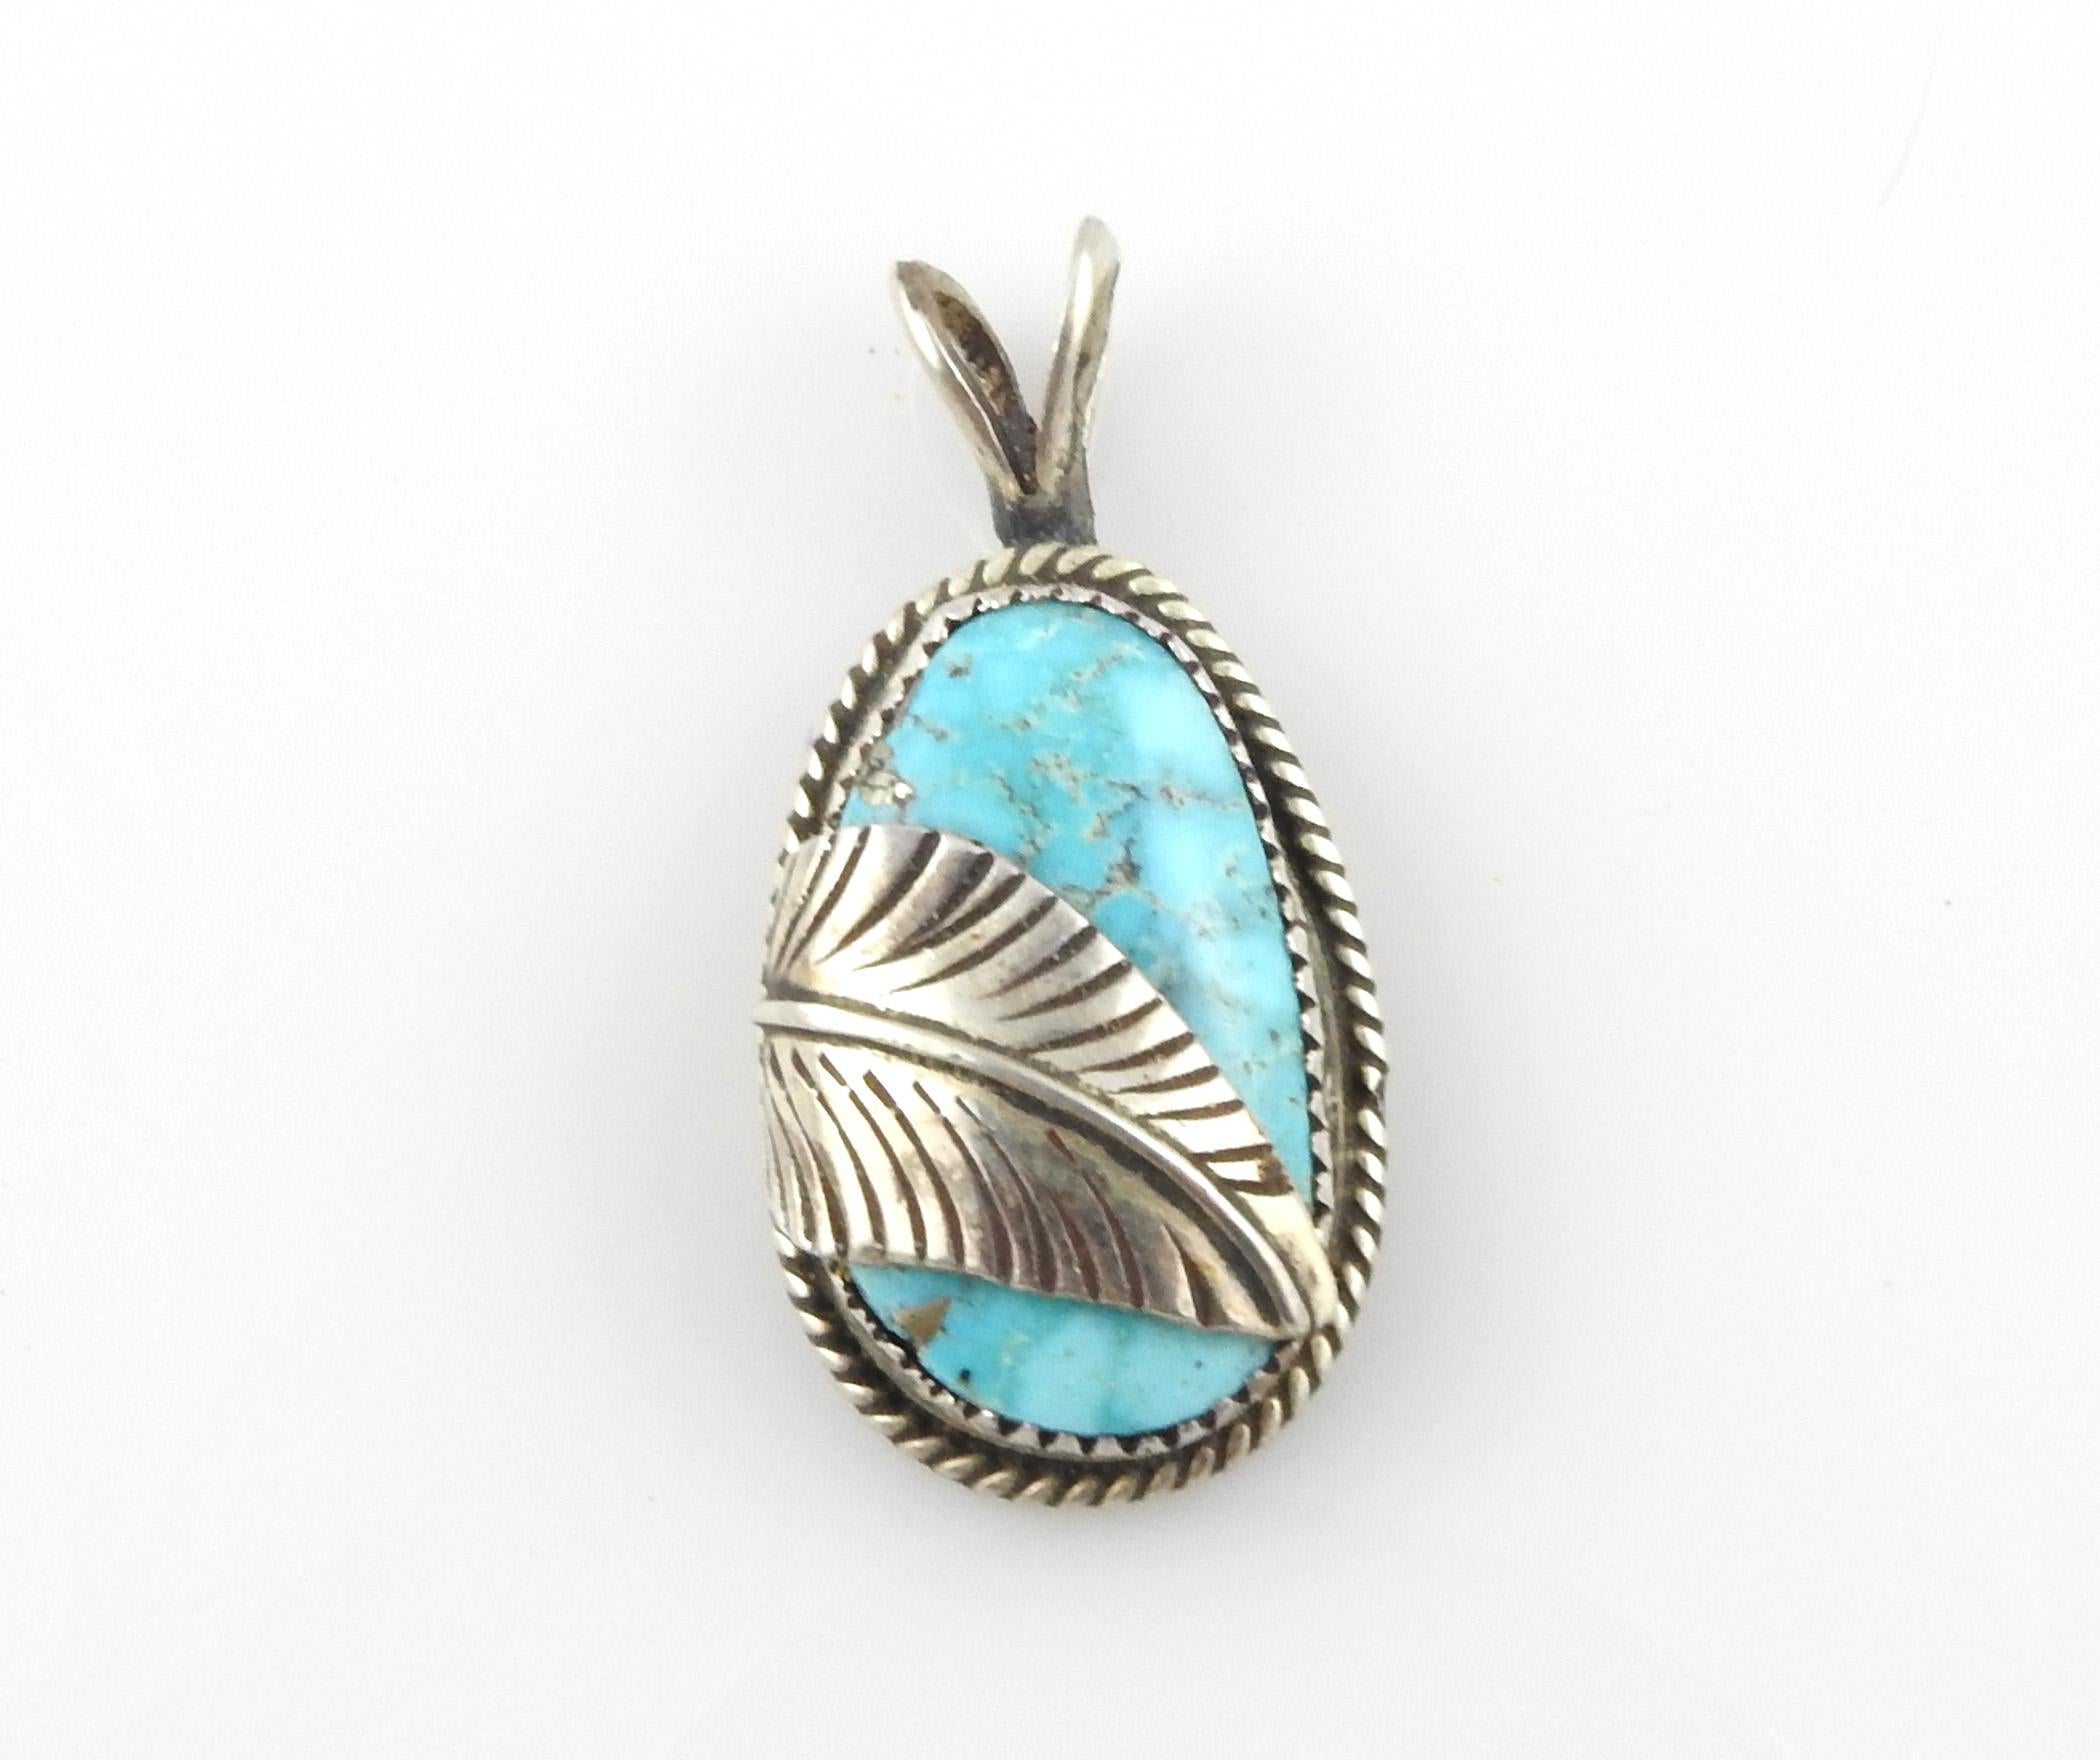 Native American Turquoise Sterling Silver Pendant

Marked: N Sterling A

Measurements:

1 5/8